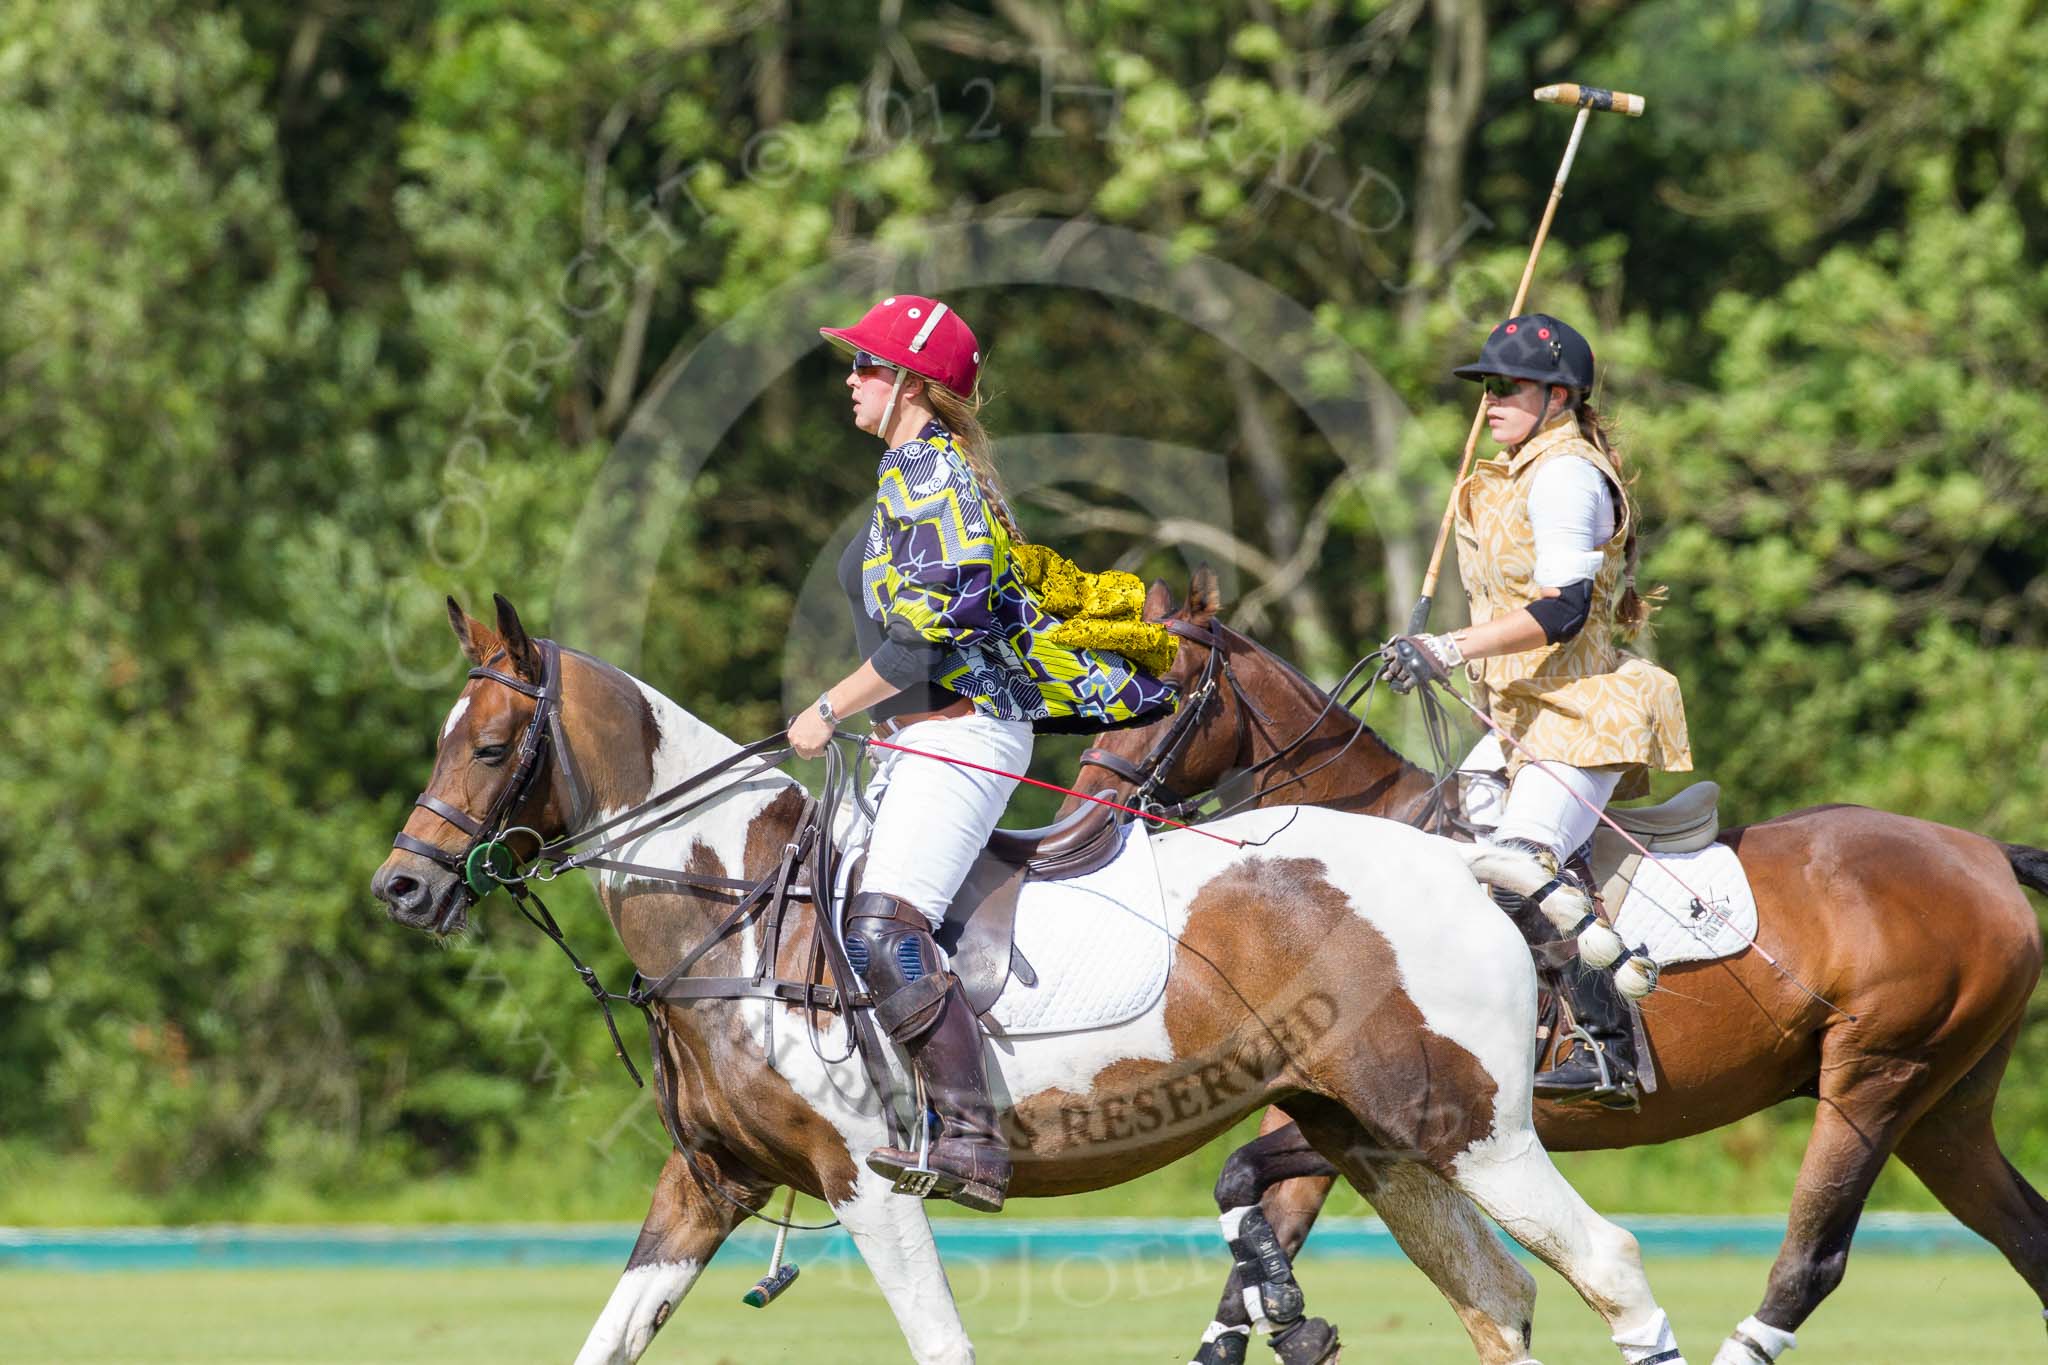 7th Heritage Polo Cup finals: Sophie Kyriazi from Kenia & Heloise Lorentzen..
Hurtwood Park Polo Club,
Ewhurst Green,
Surrey,
United Kingdom,
on 05 August 2012 at 15:49, image #196